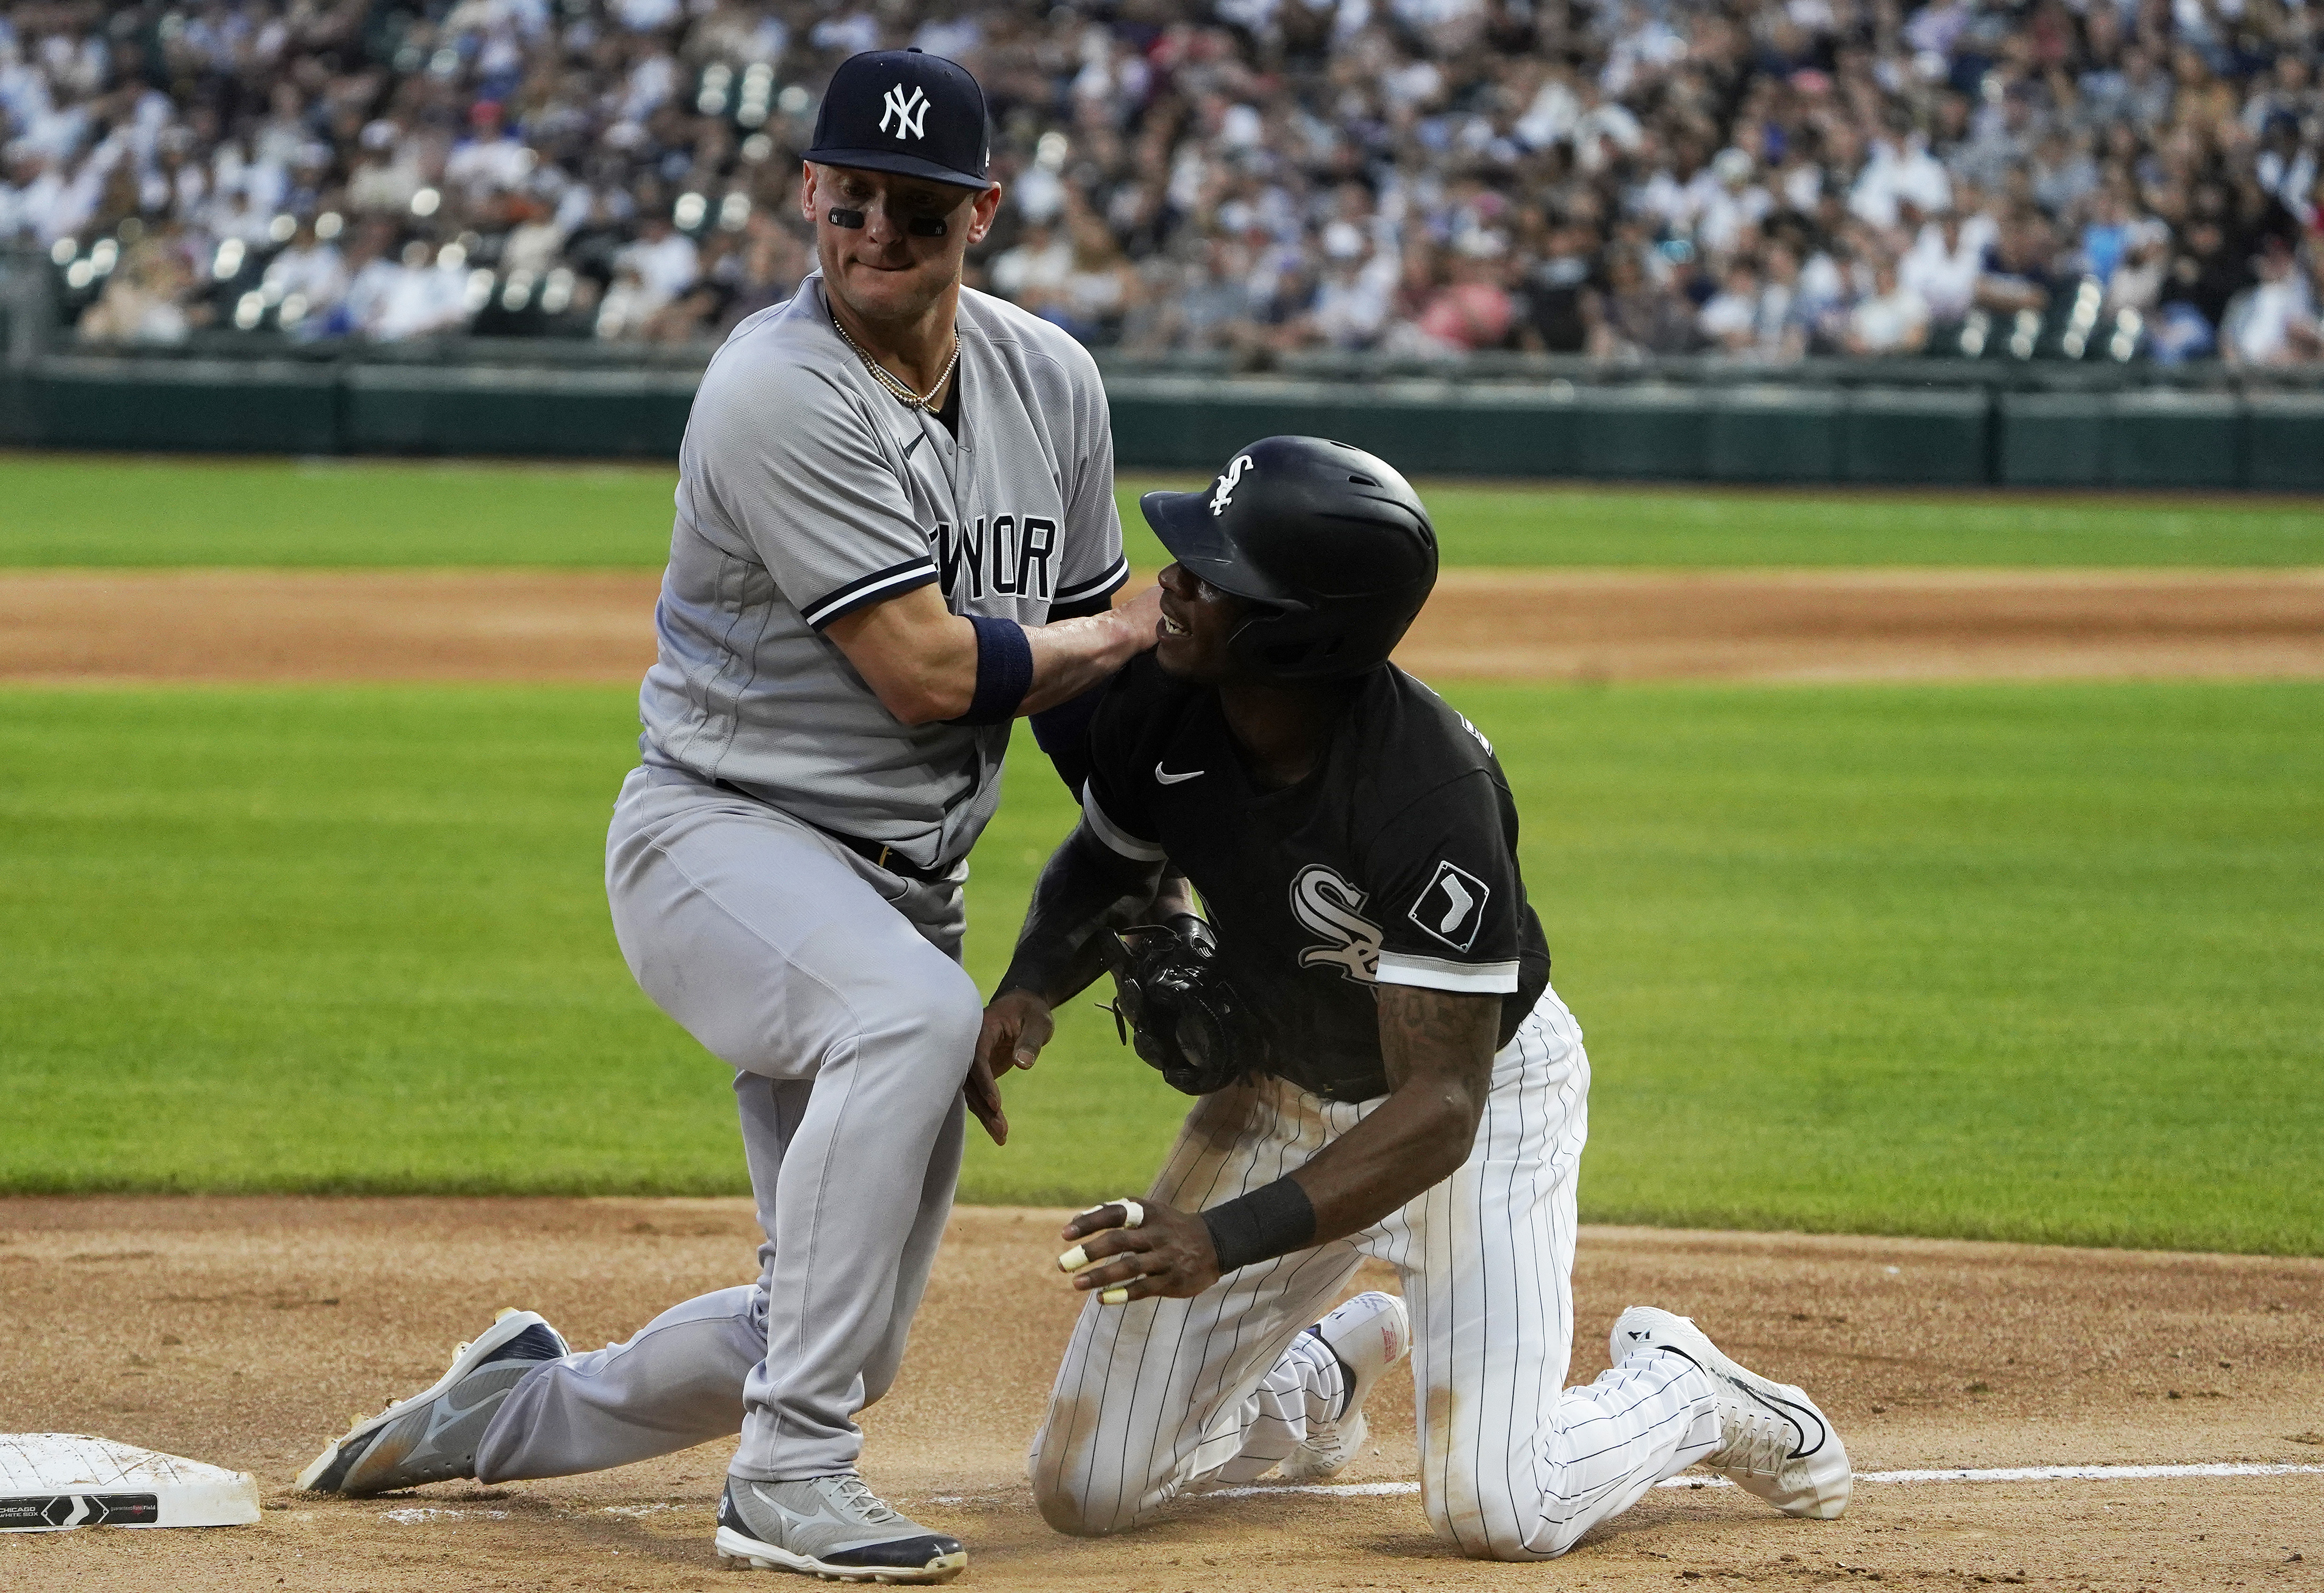 White Sox says Yankees' Donaldson made racist remark toward Anderson